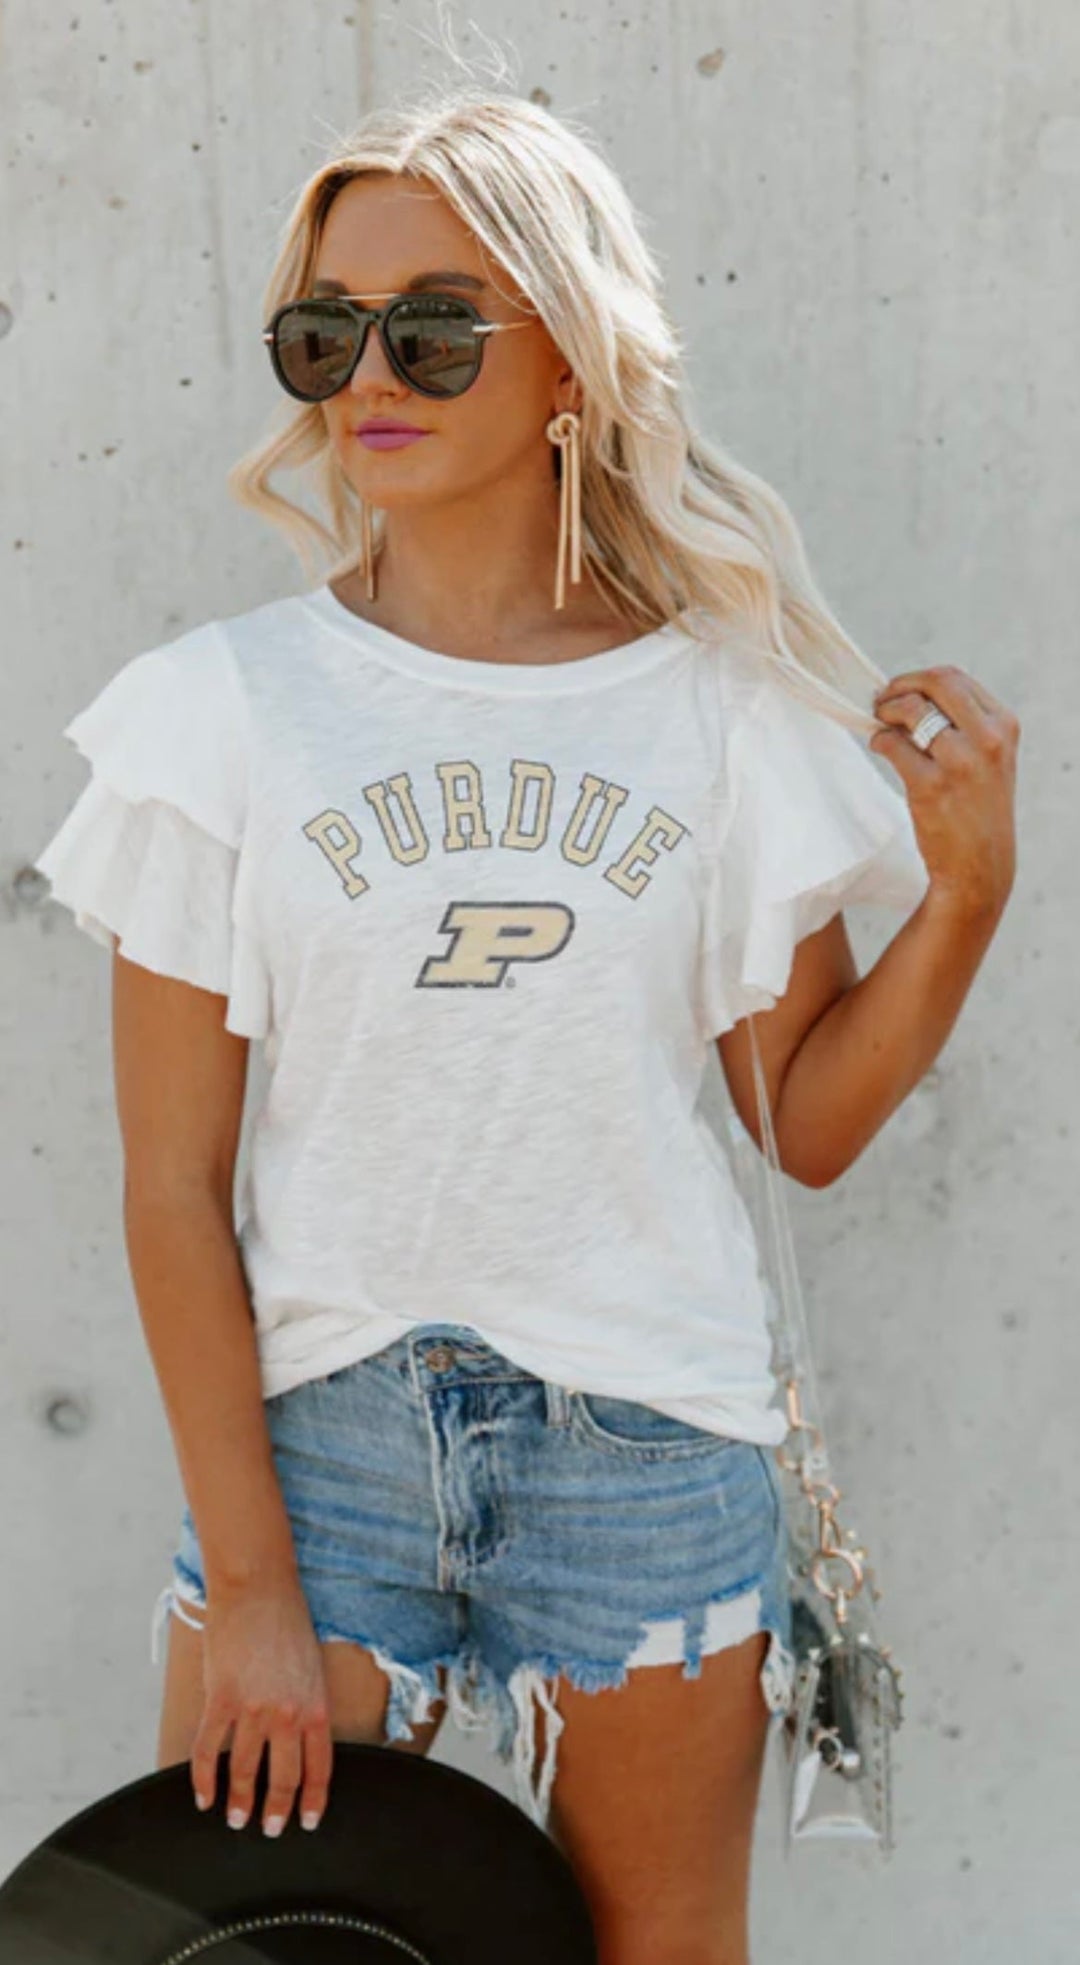 Purdue All In To Win Flutter Tee